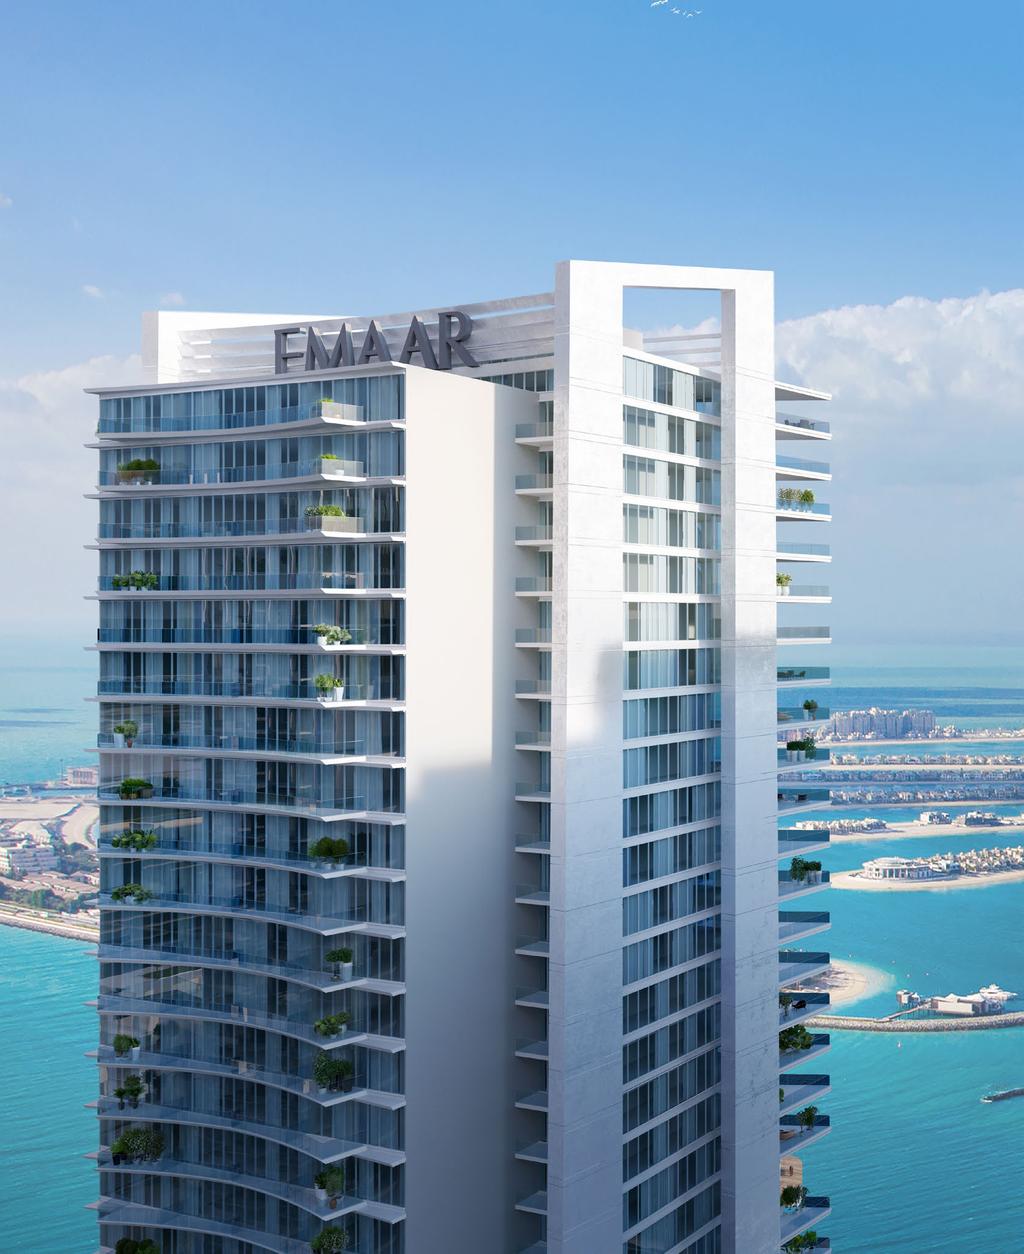 BEACH VISTA AT EMAAR BEACHFRONT The next level of refined beachfront living The first estate to be launched at EMAAR Beachfront